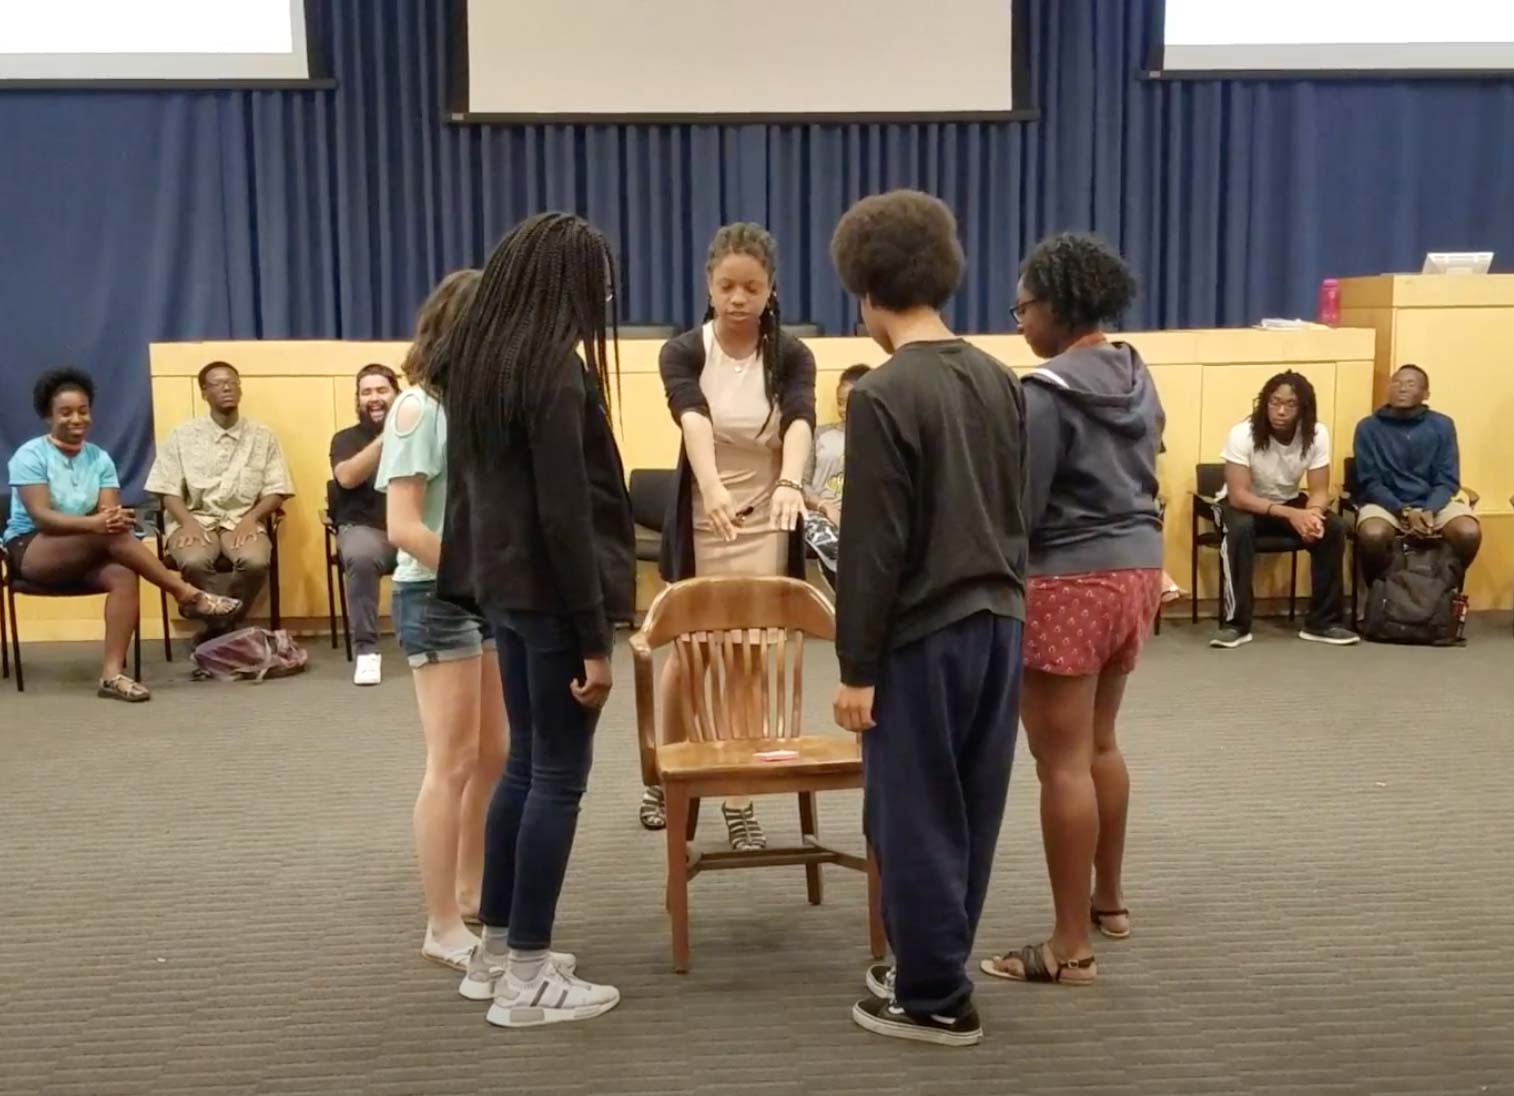 5 students circled around a wooden chair while adults look on